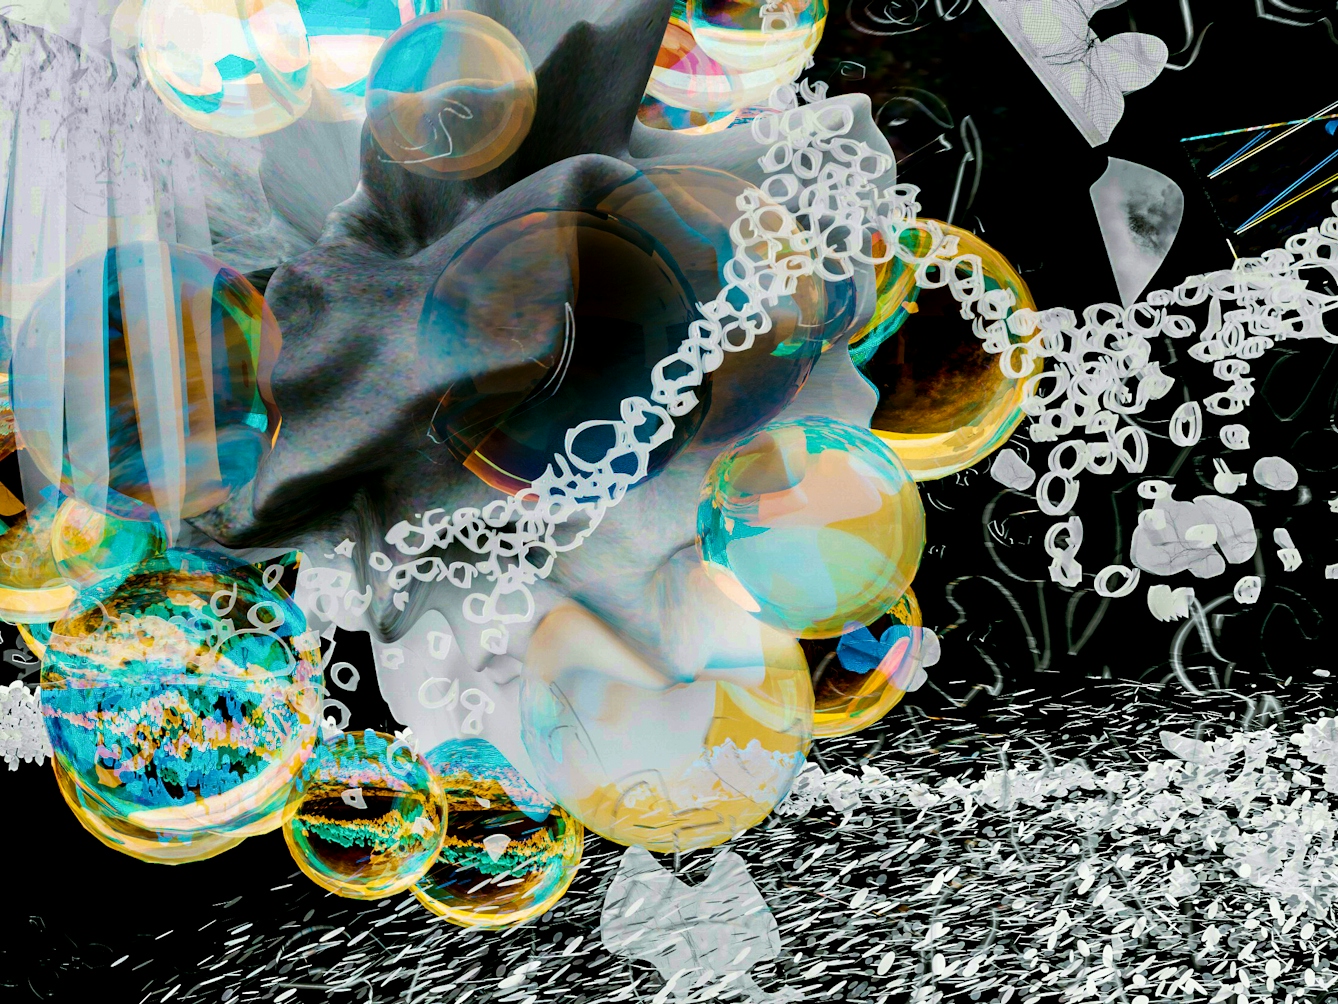 Mixed media artwork depicting a detail from a larger artwork. The scene is rich in details and shows a cluster of of bubble shaped objects coloured yellow, blue and green. Overlaying and underlaying these elements are a multitude of other shapes and objects resembling molecules and bubbles.